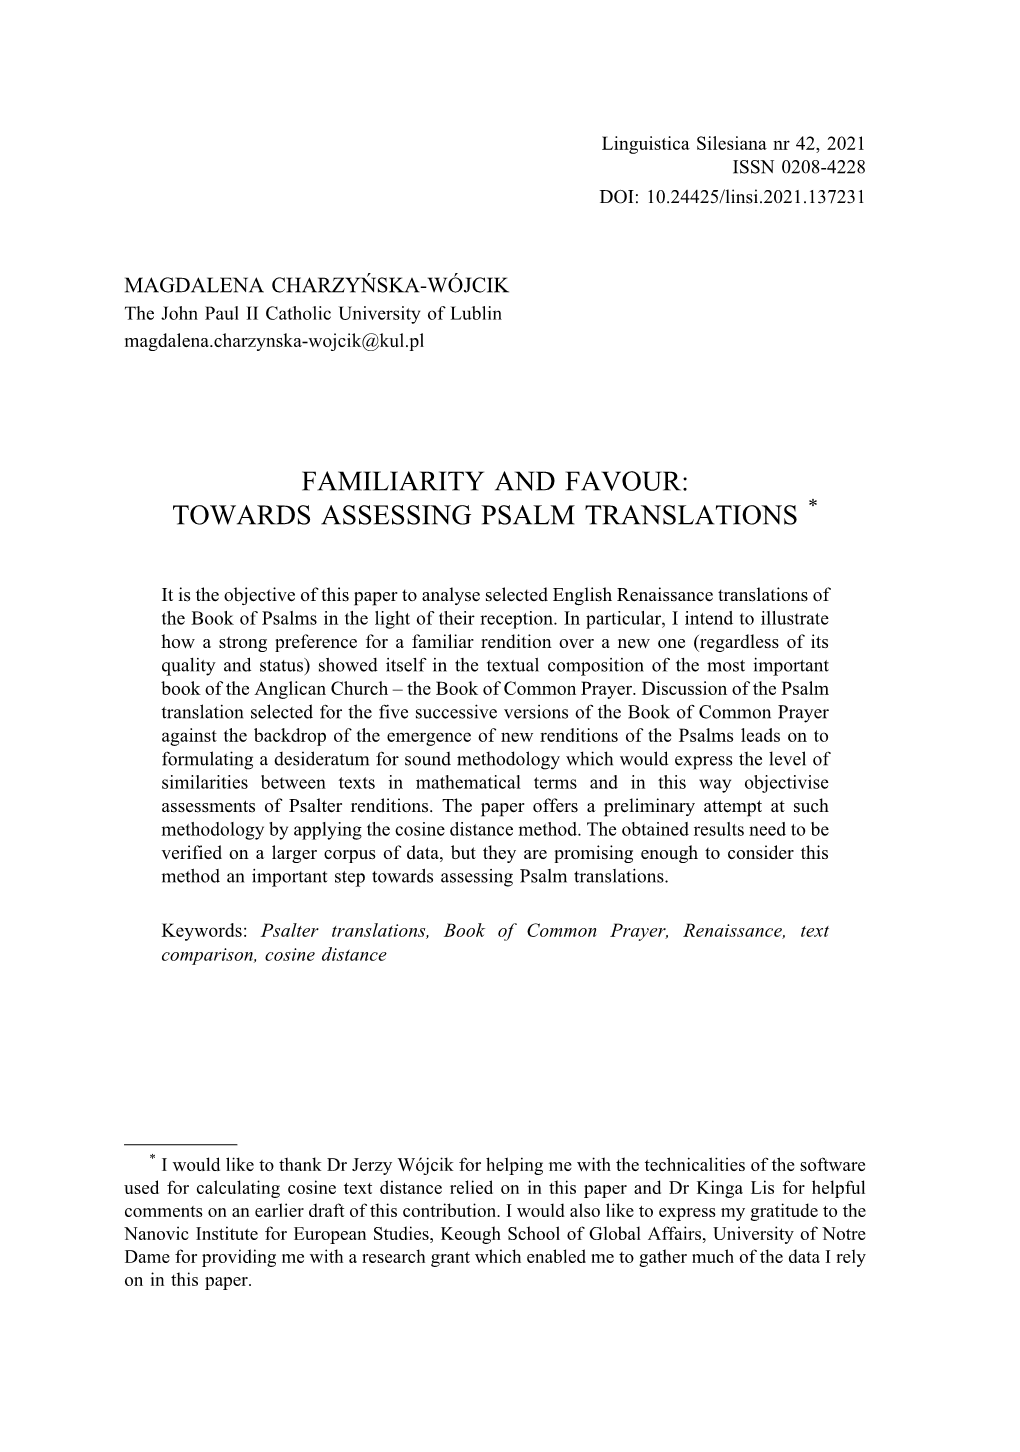 Familiarity and Favour: Towards Assessing Psalm Translations *